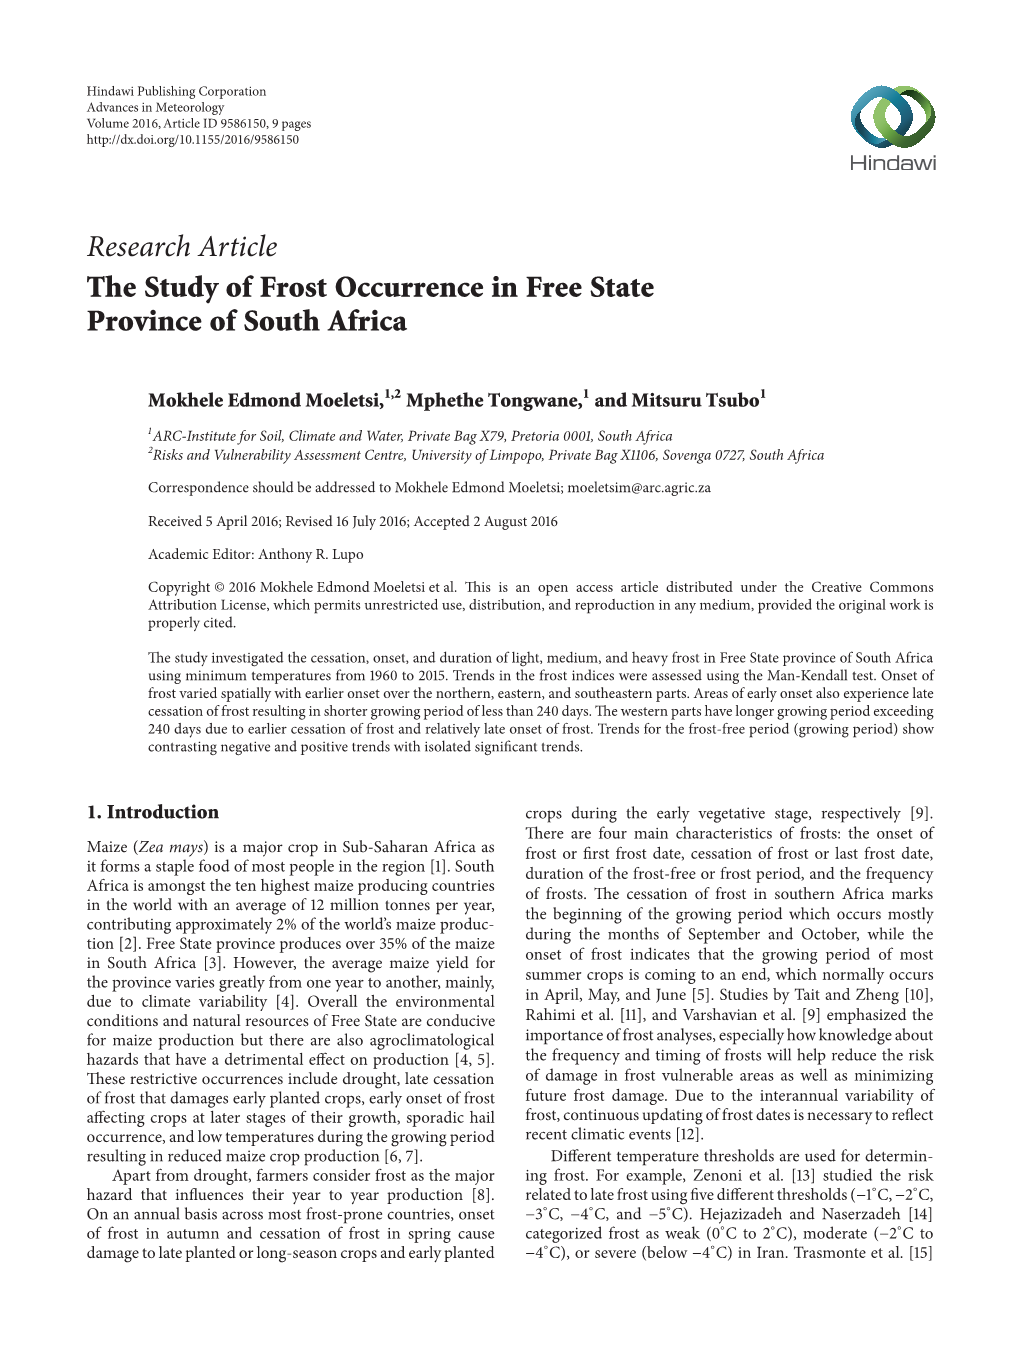 Research Article the Study of Frost Occurrence in Free State Province of South Africa